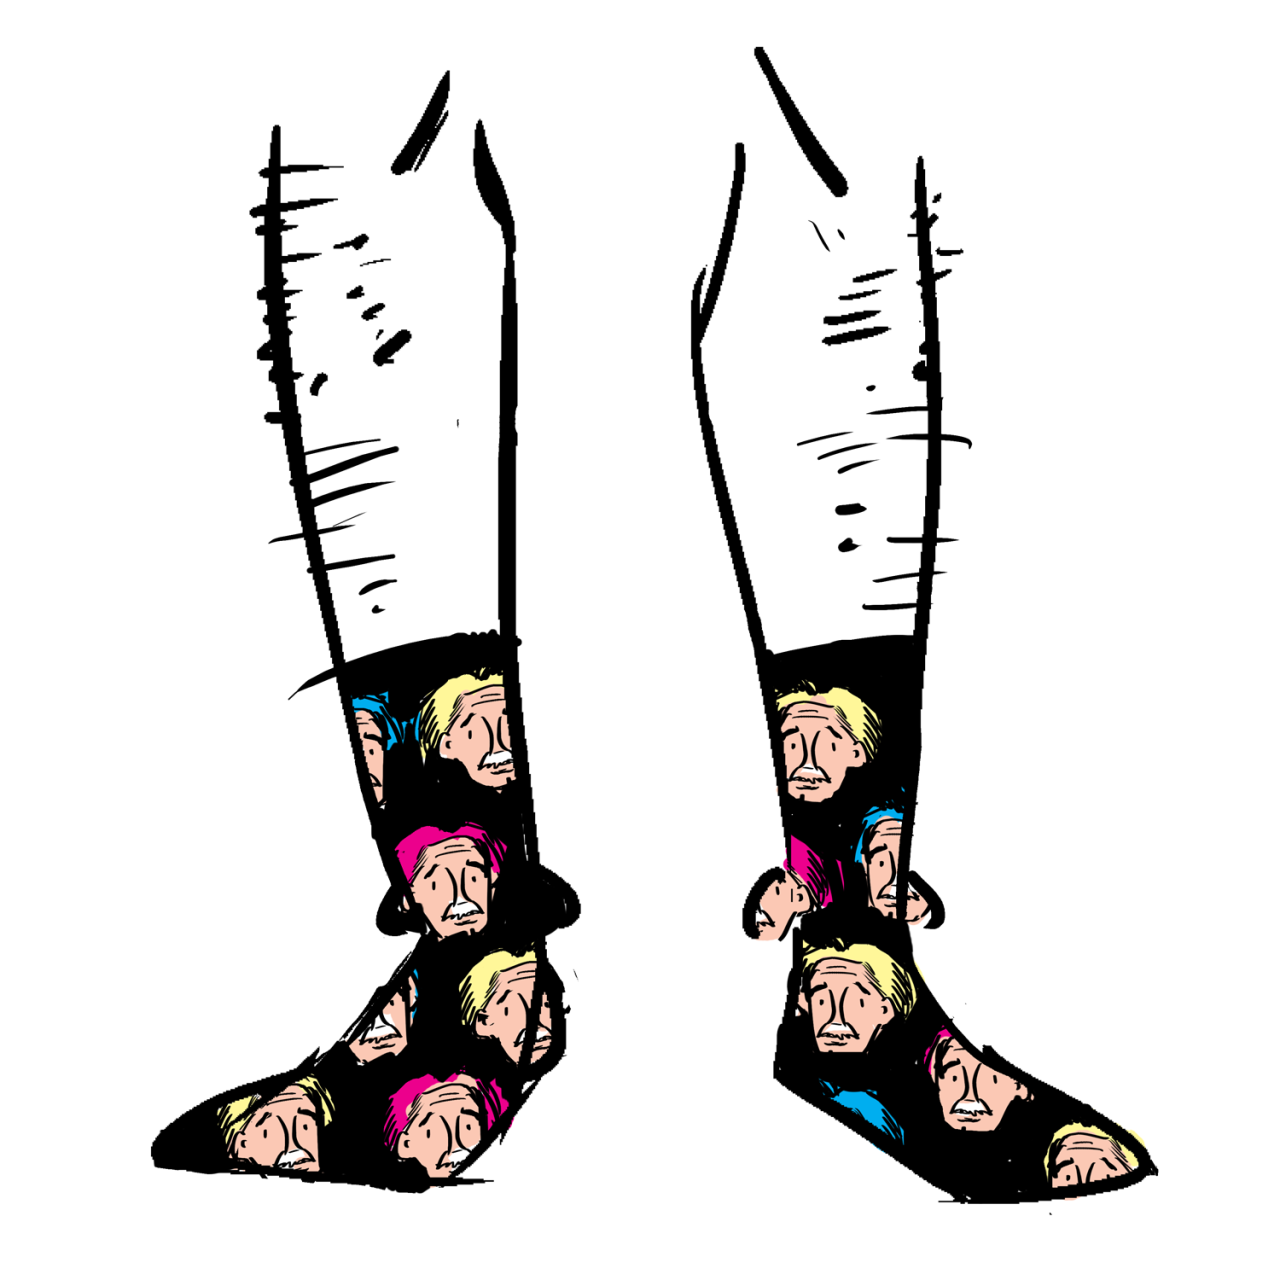 Black socks with the face of Einstein repeated as a pattern. His hair is pink, blue, and yellow.